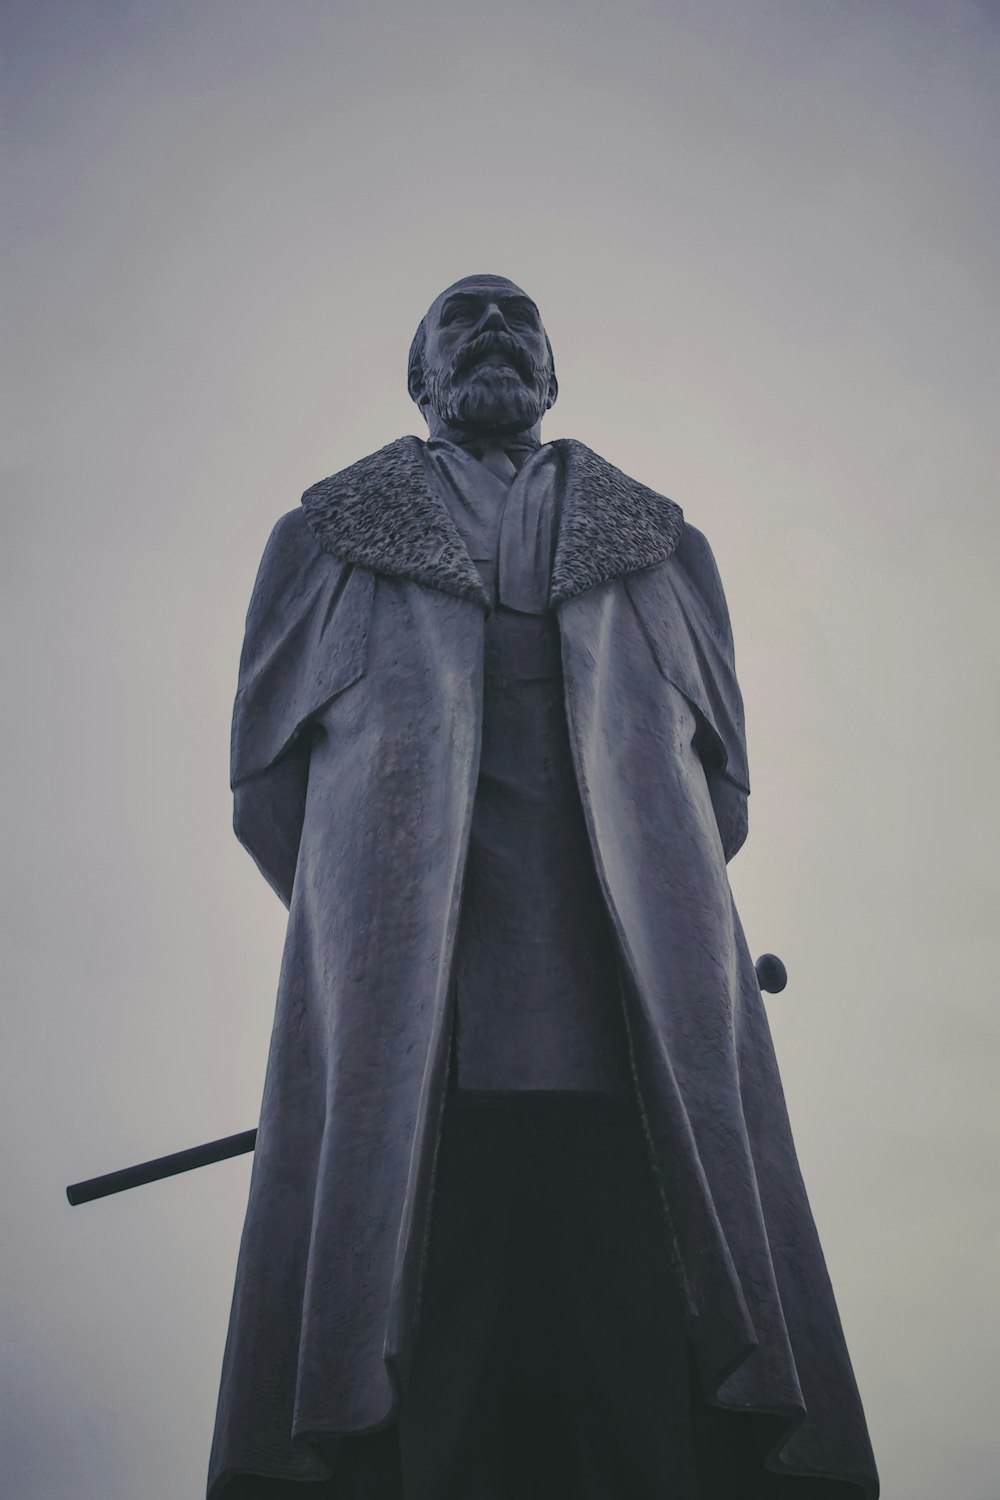 a statue of a man wearing a coat and holding a sword